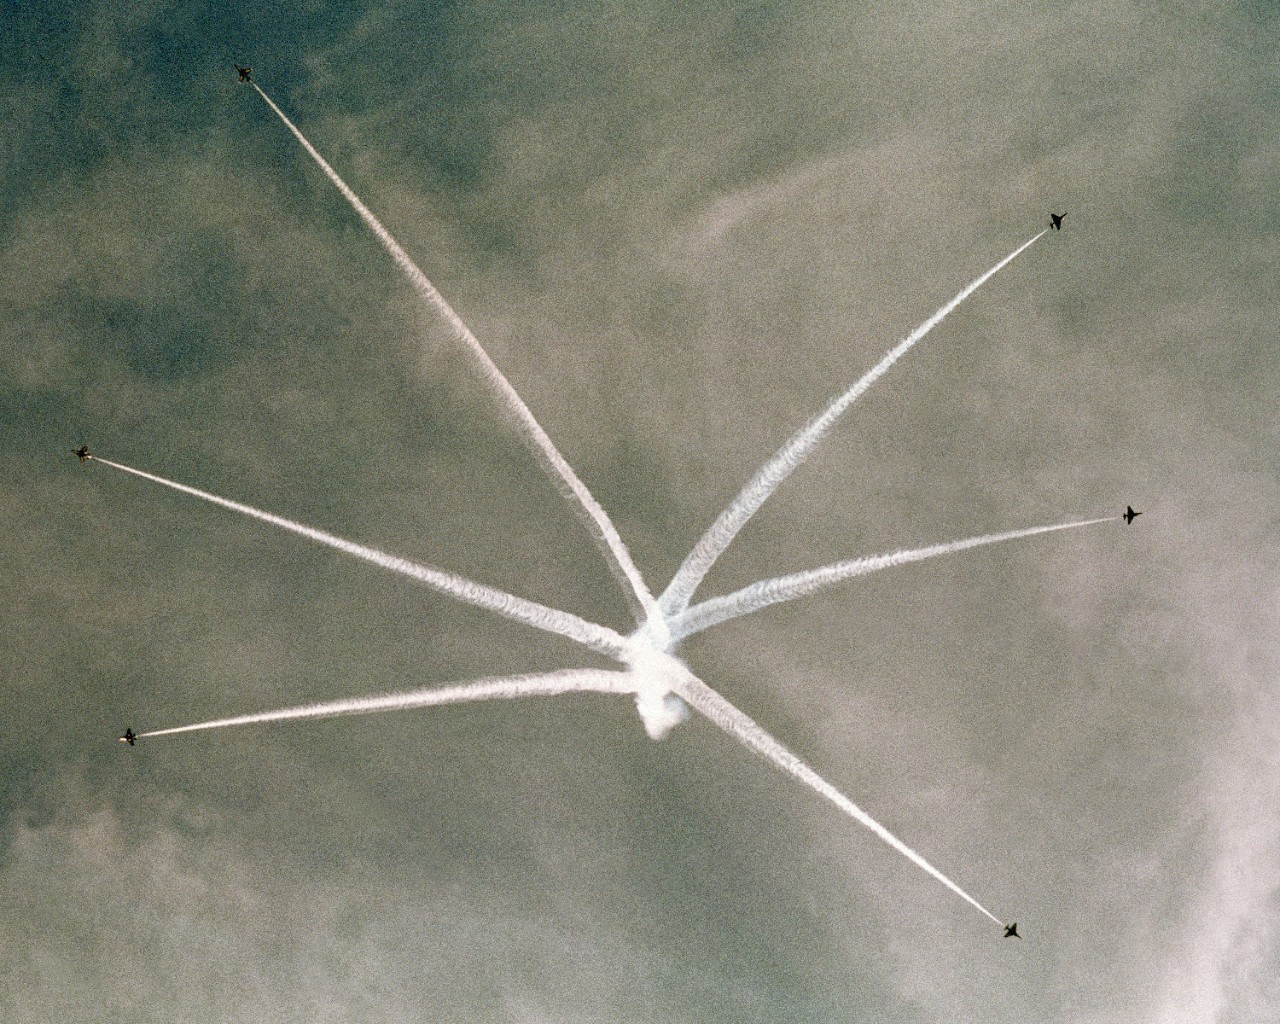 330-CFD-DN-SC-84-09553:   Blue Angels Maneuver:  High-Show Bomb Burst.  Six A-4F Skyhawks, July 1984.   Photographed by PH2 Paul O’Mara.  Official U.S. Navy Photograph now in the collections of the National Archives.  